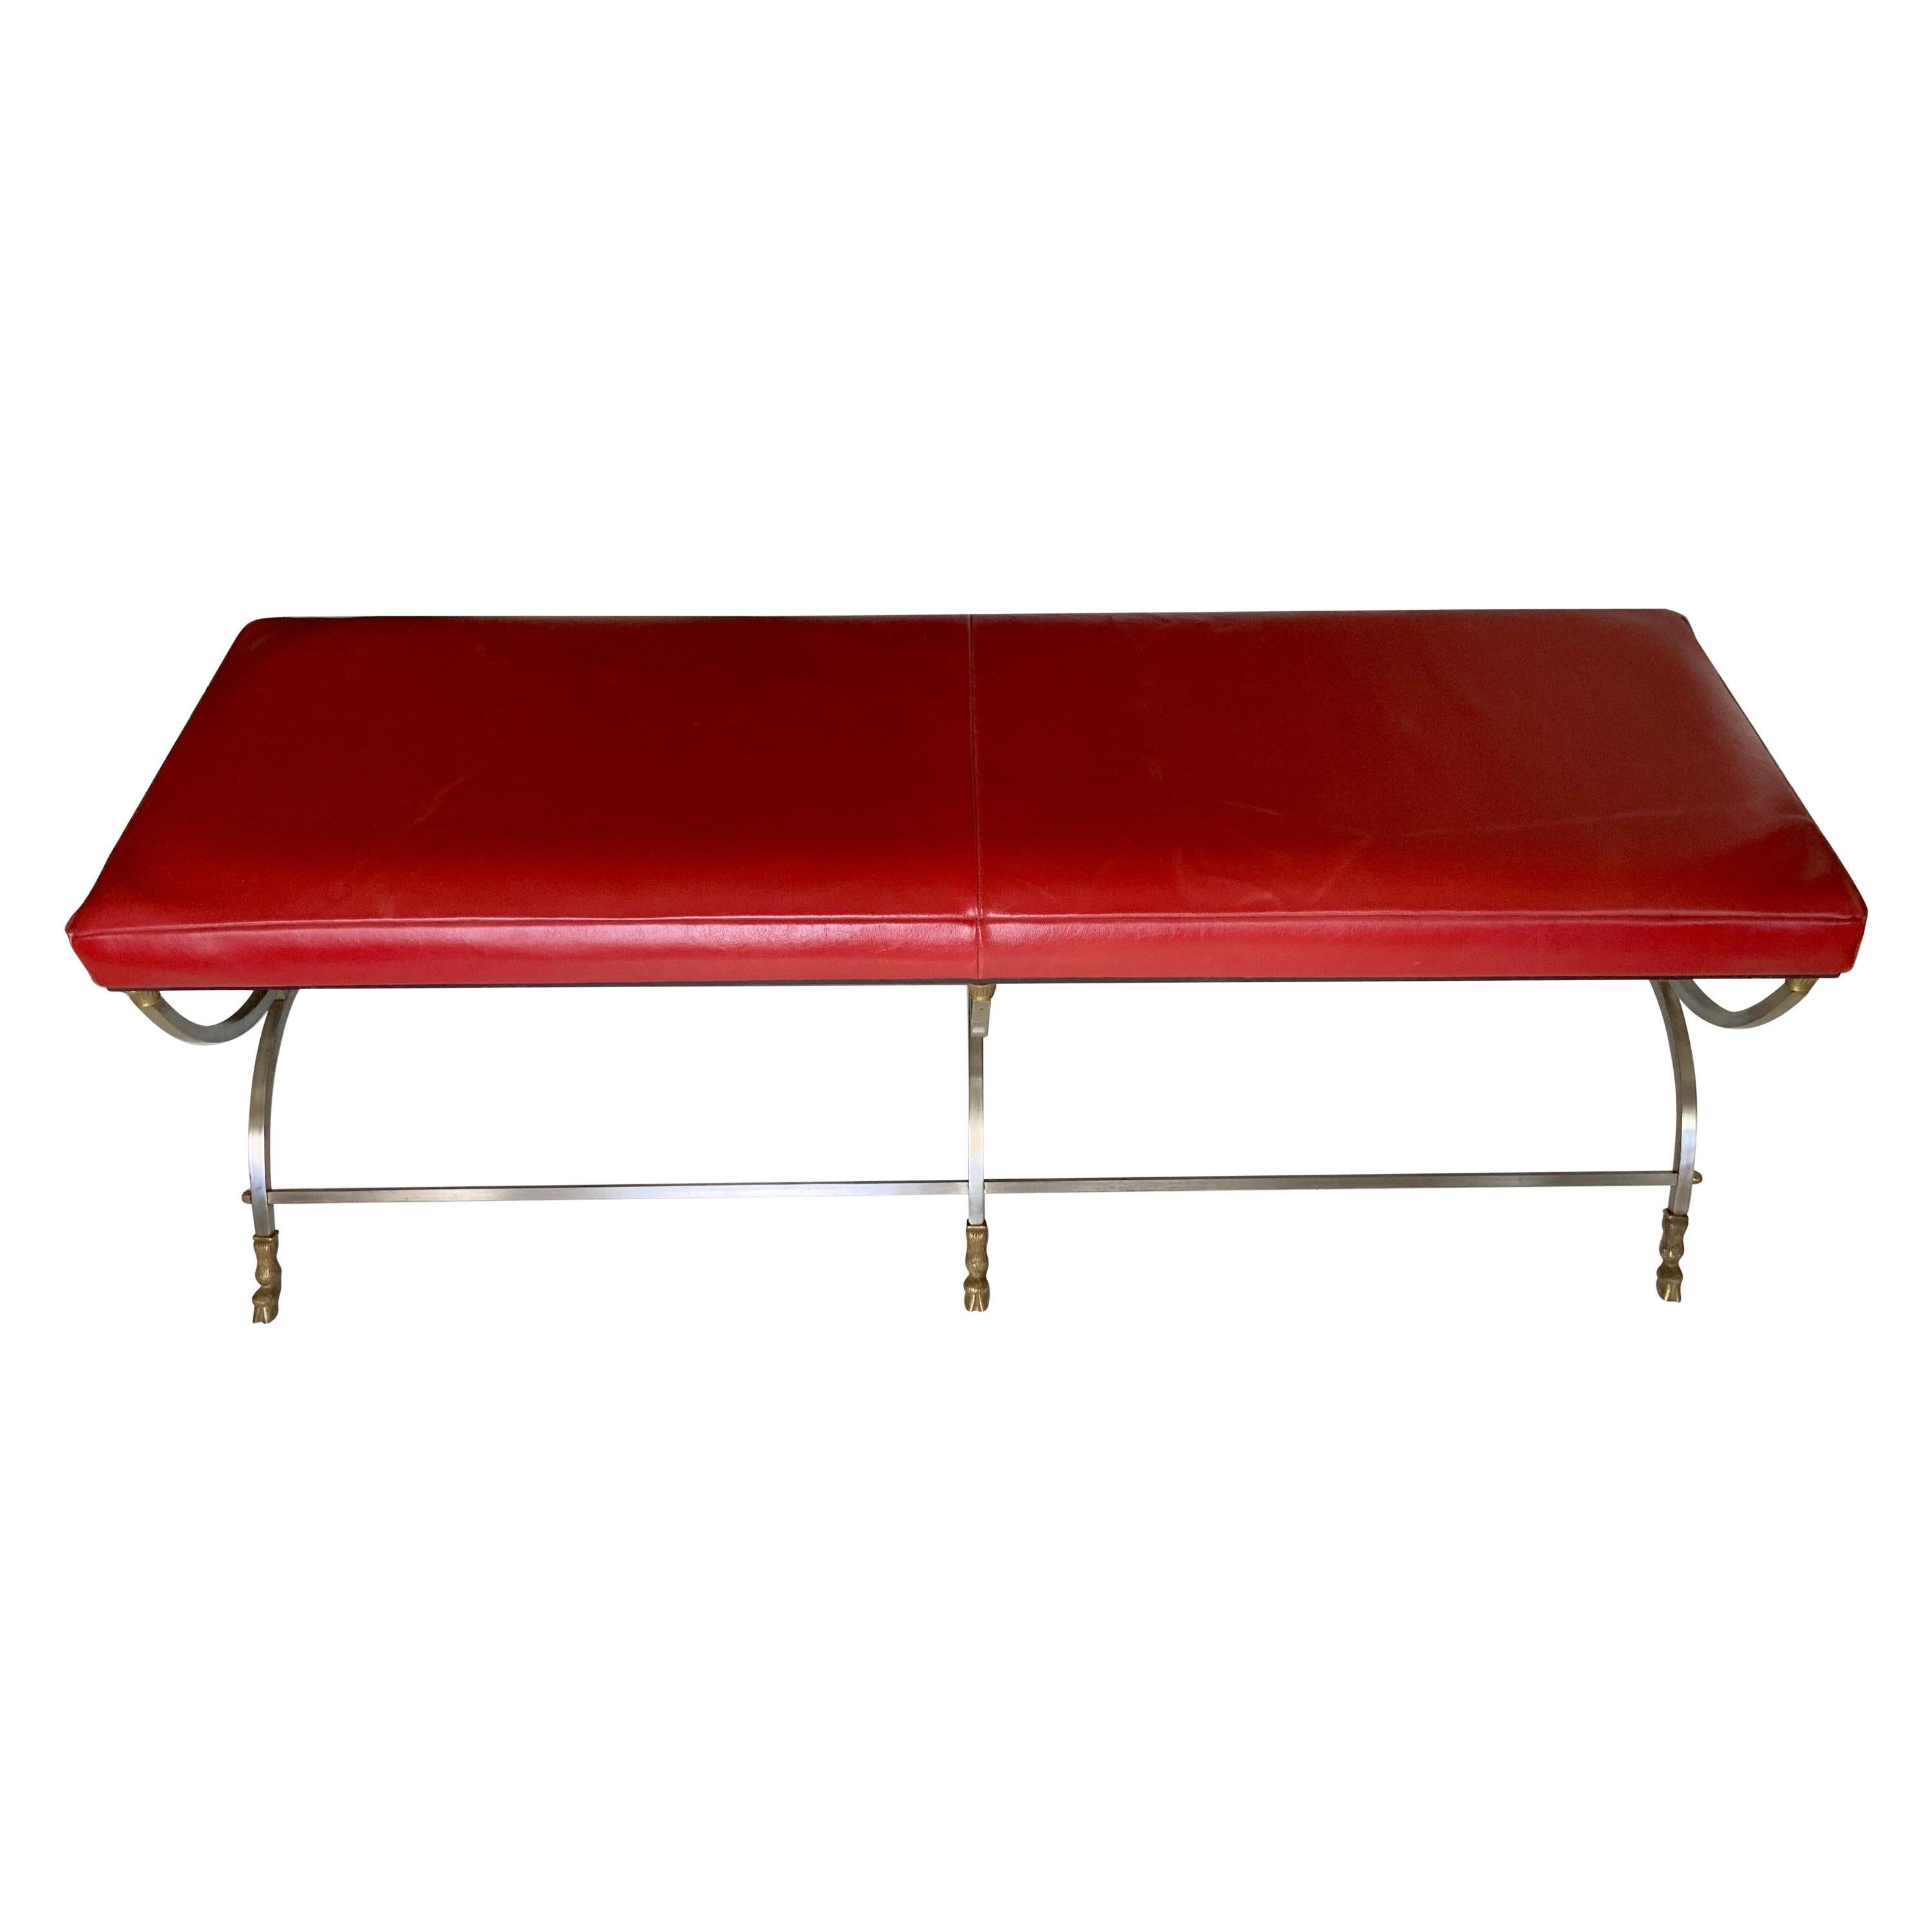 Maison Jansen Neoclassical Bronze and Steel Bench in Red Leather Upholstery